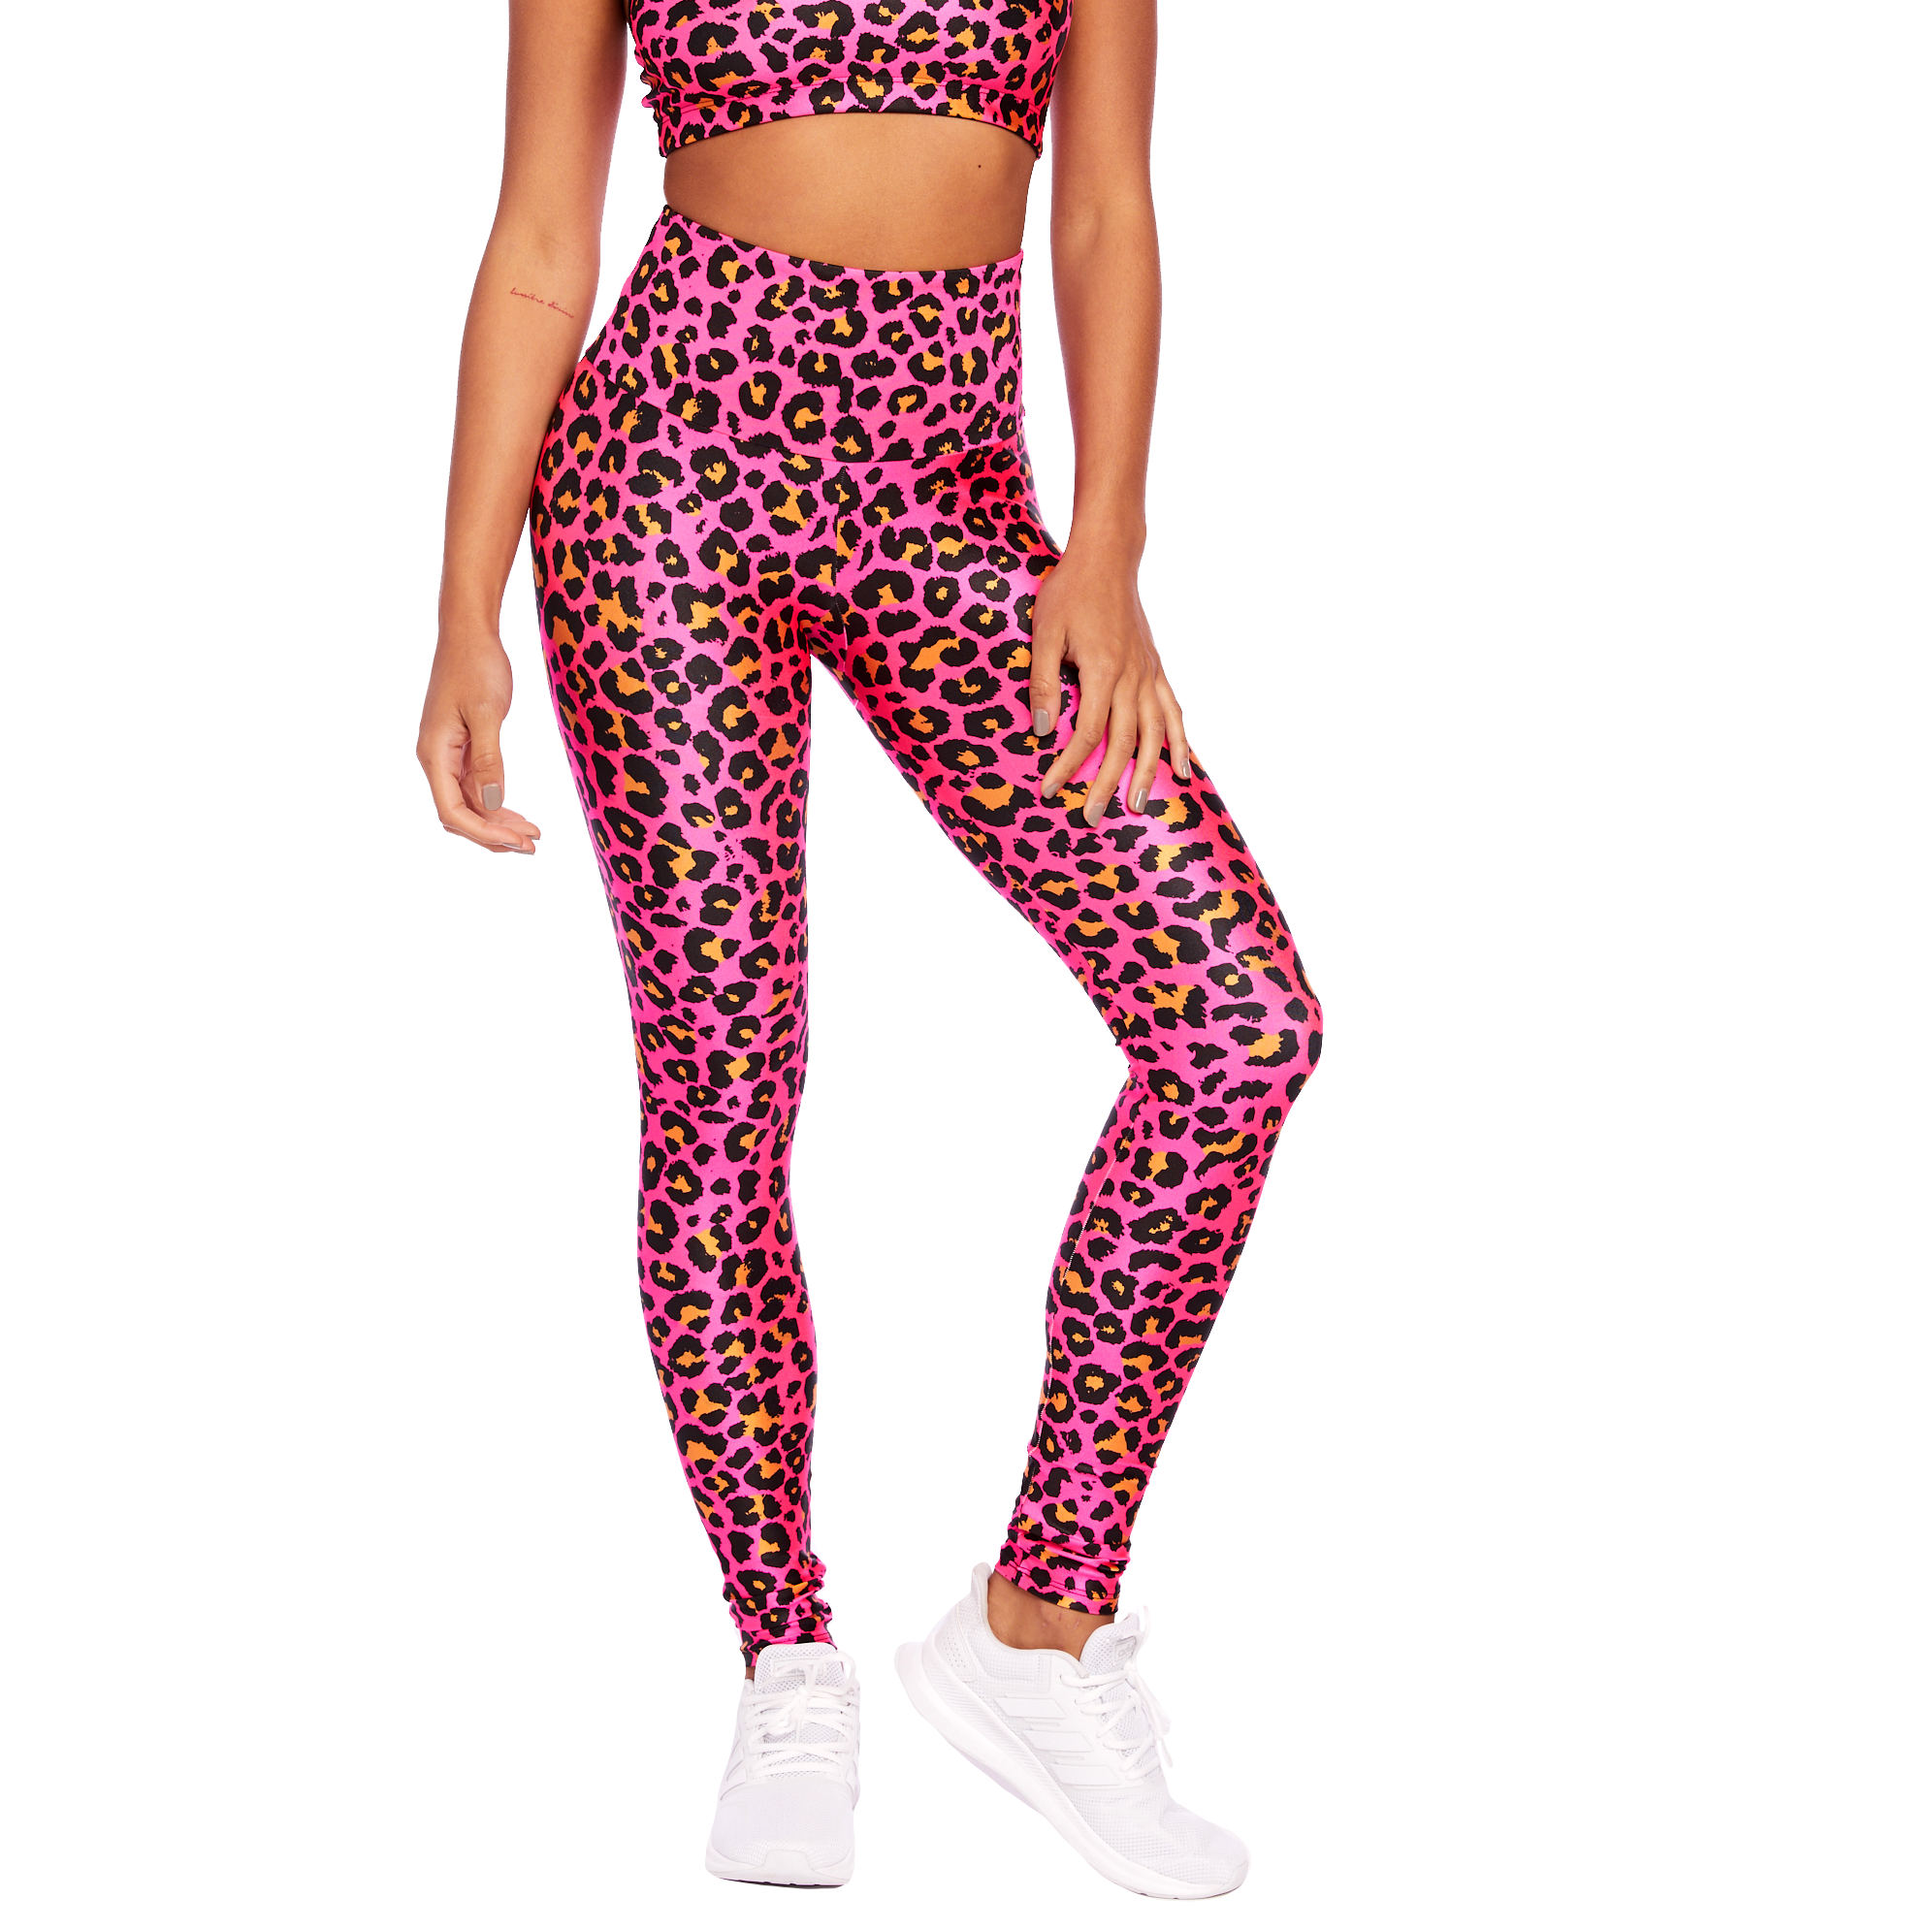 Goldsheep Pink Glitter Leggings  Get the Tone It Up Look With